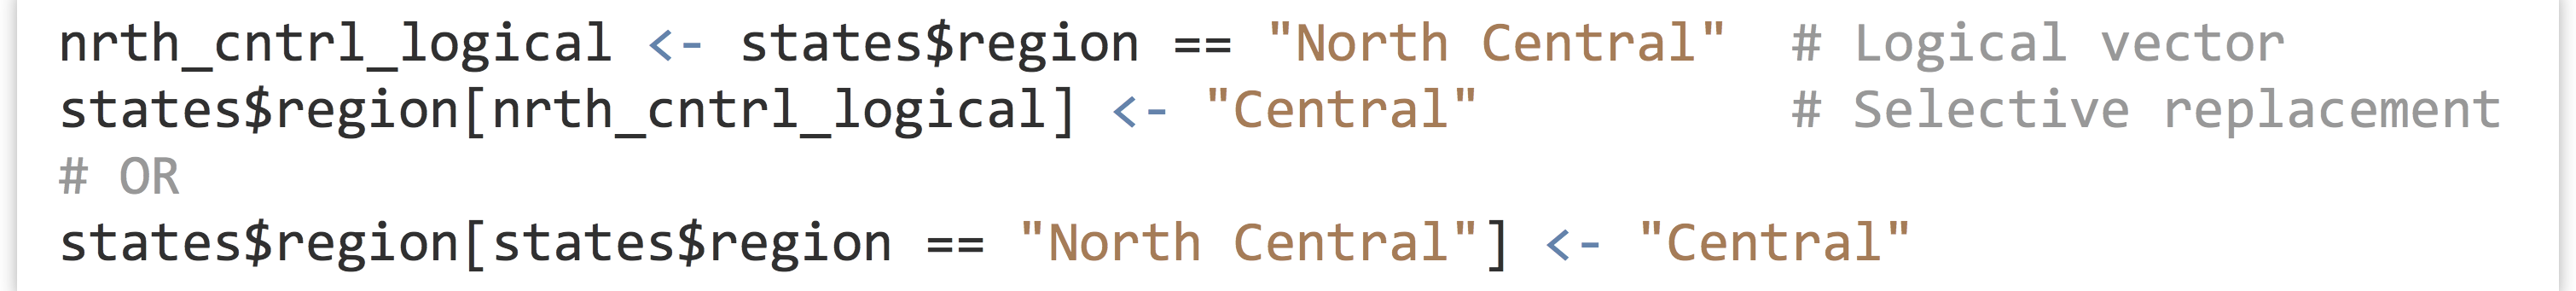 III.3_61_r_69_states_col_rename_north_central